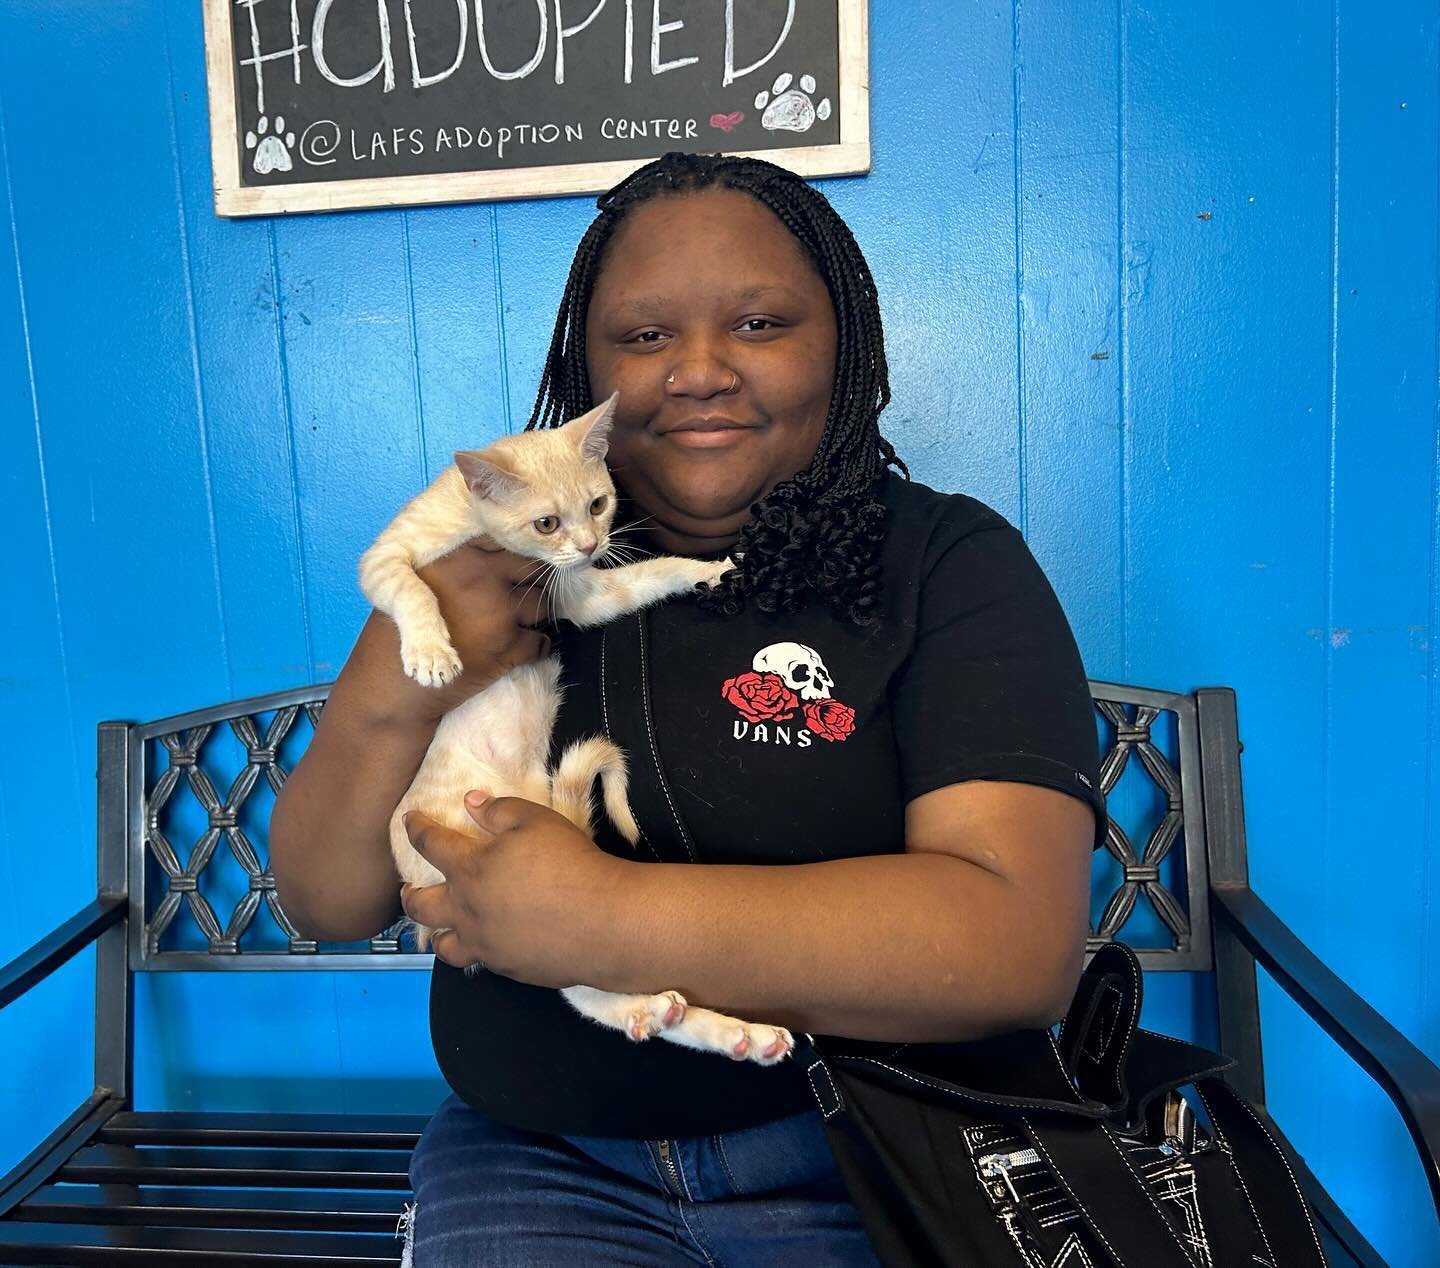 Our new friend Cheeto was #adopted!